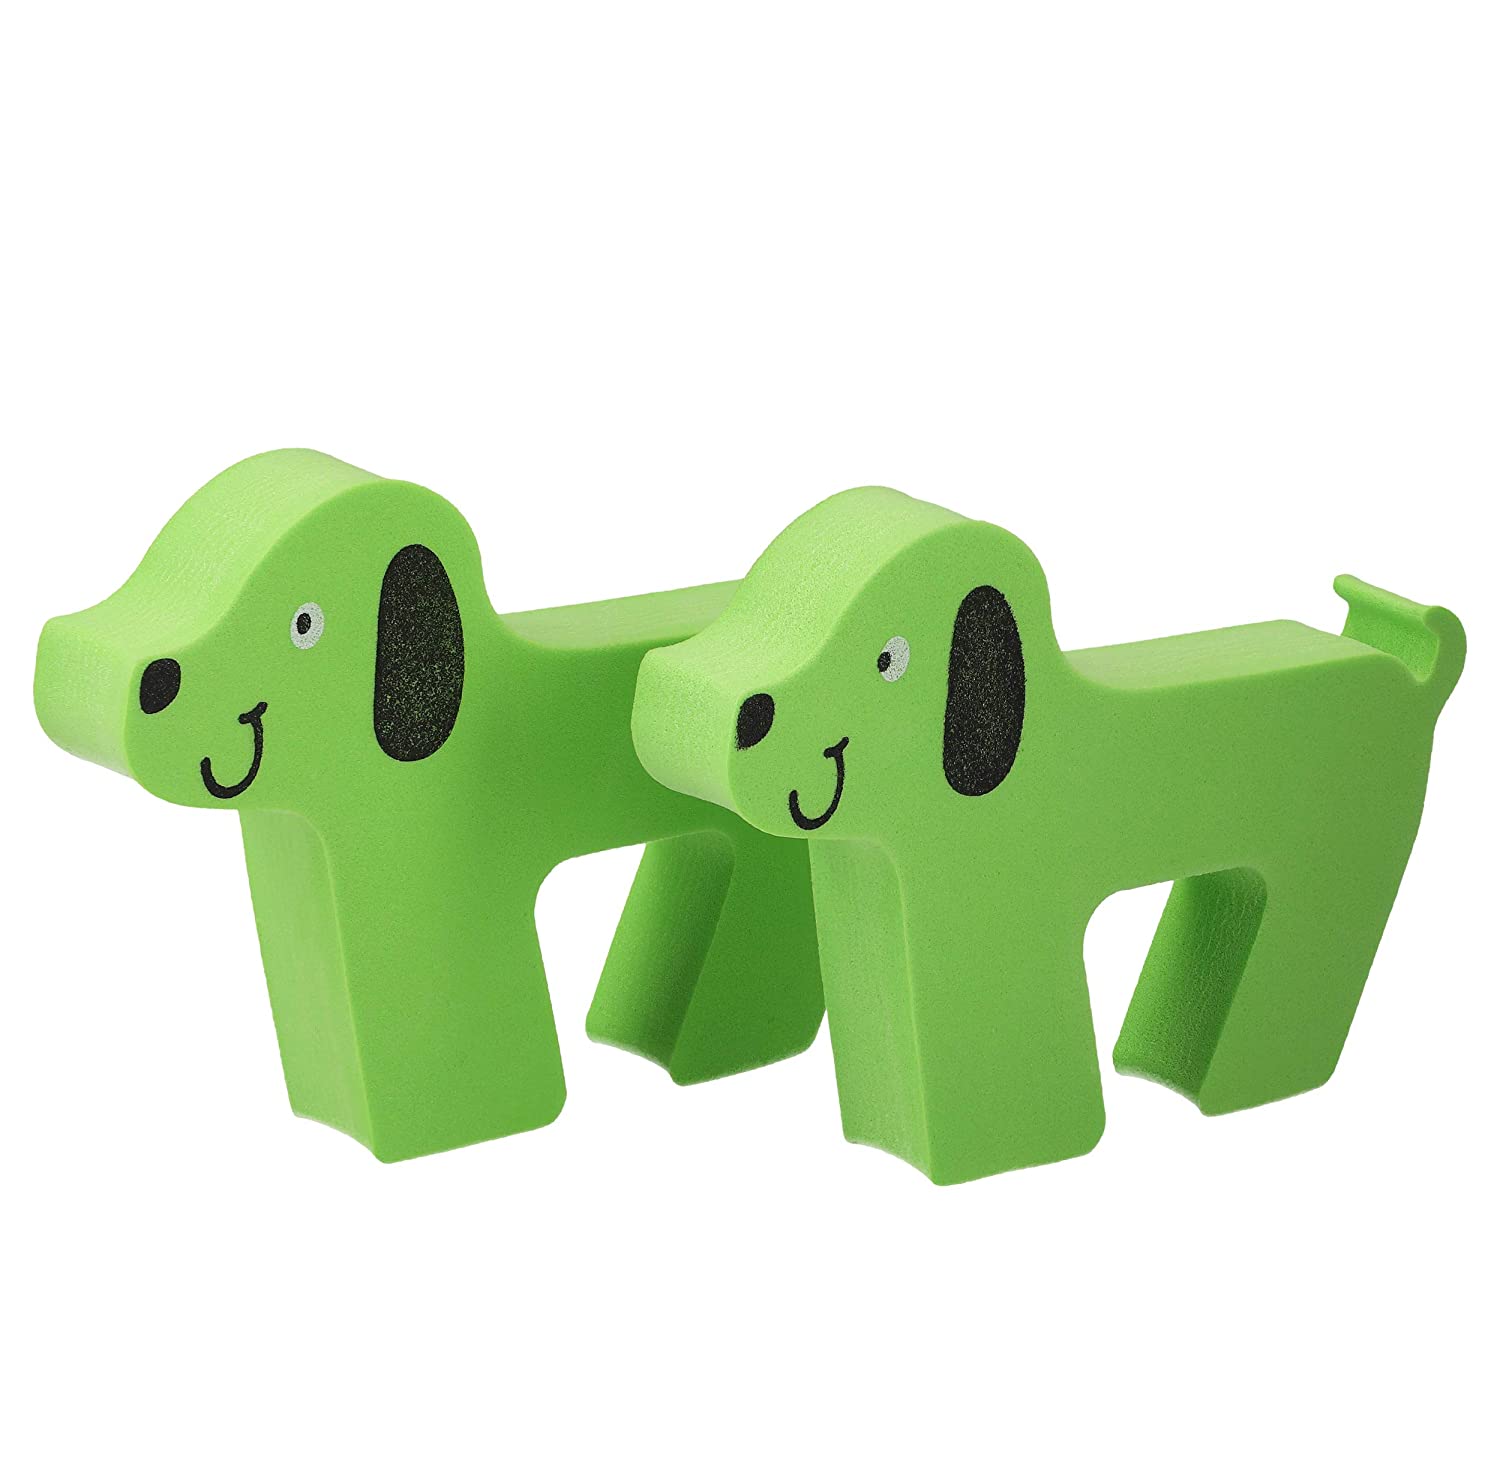 Door Stopper Clamping Protection for Doors and Windows Plastic Green Dog